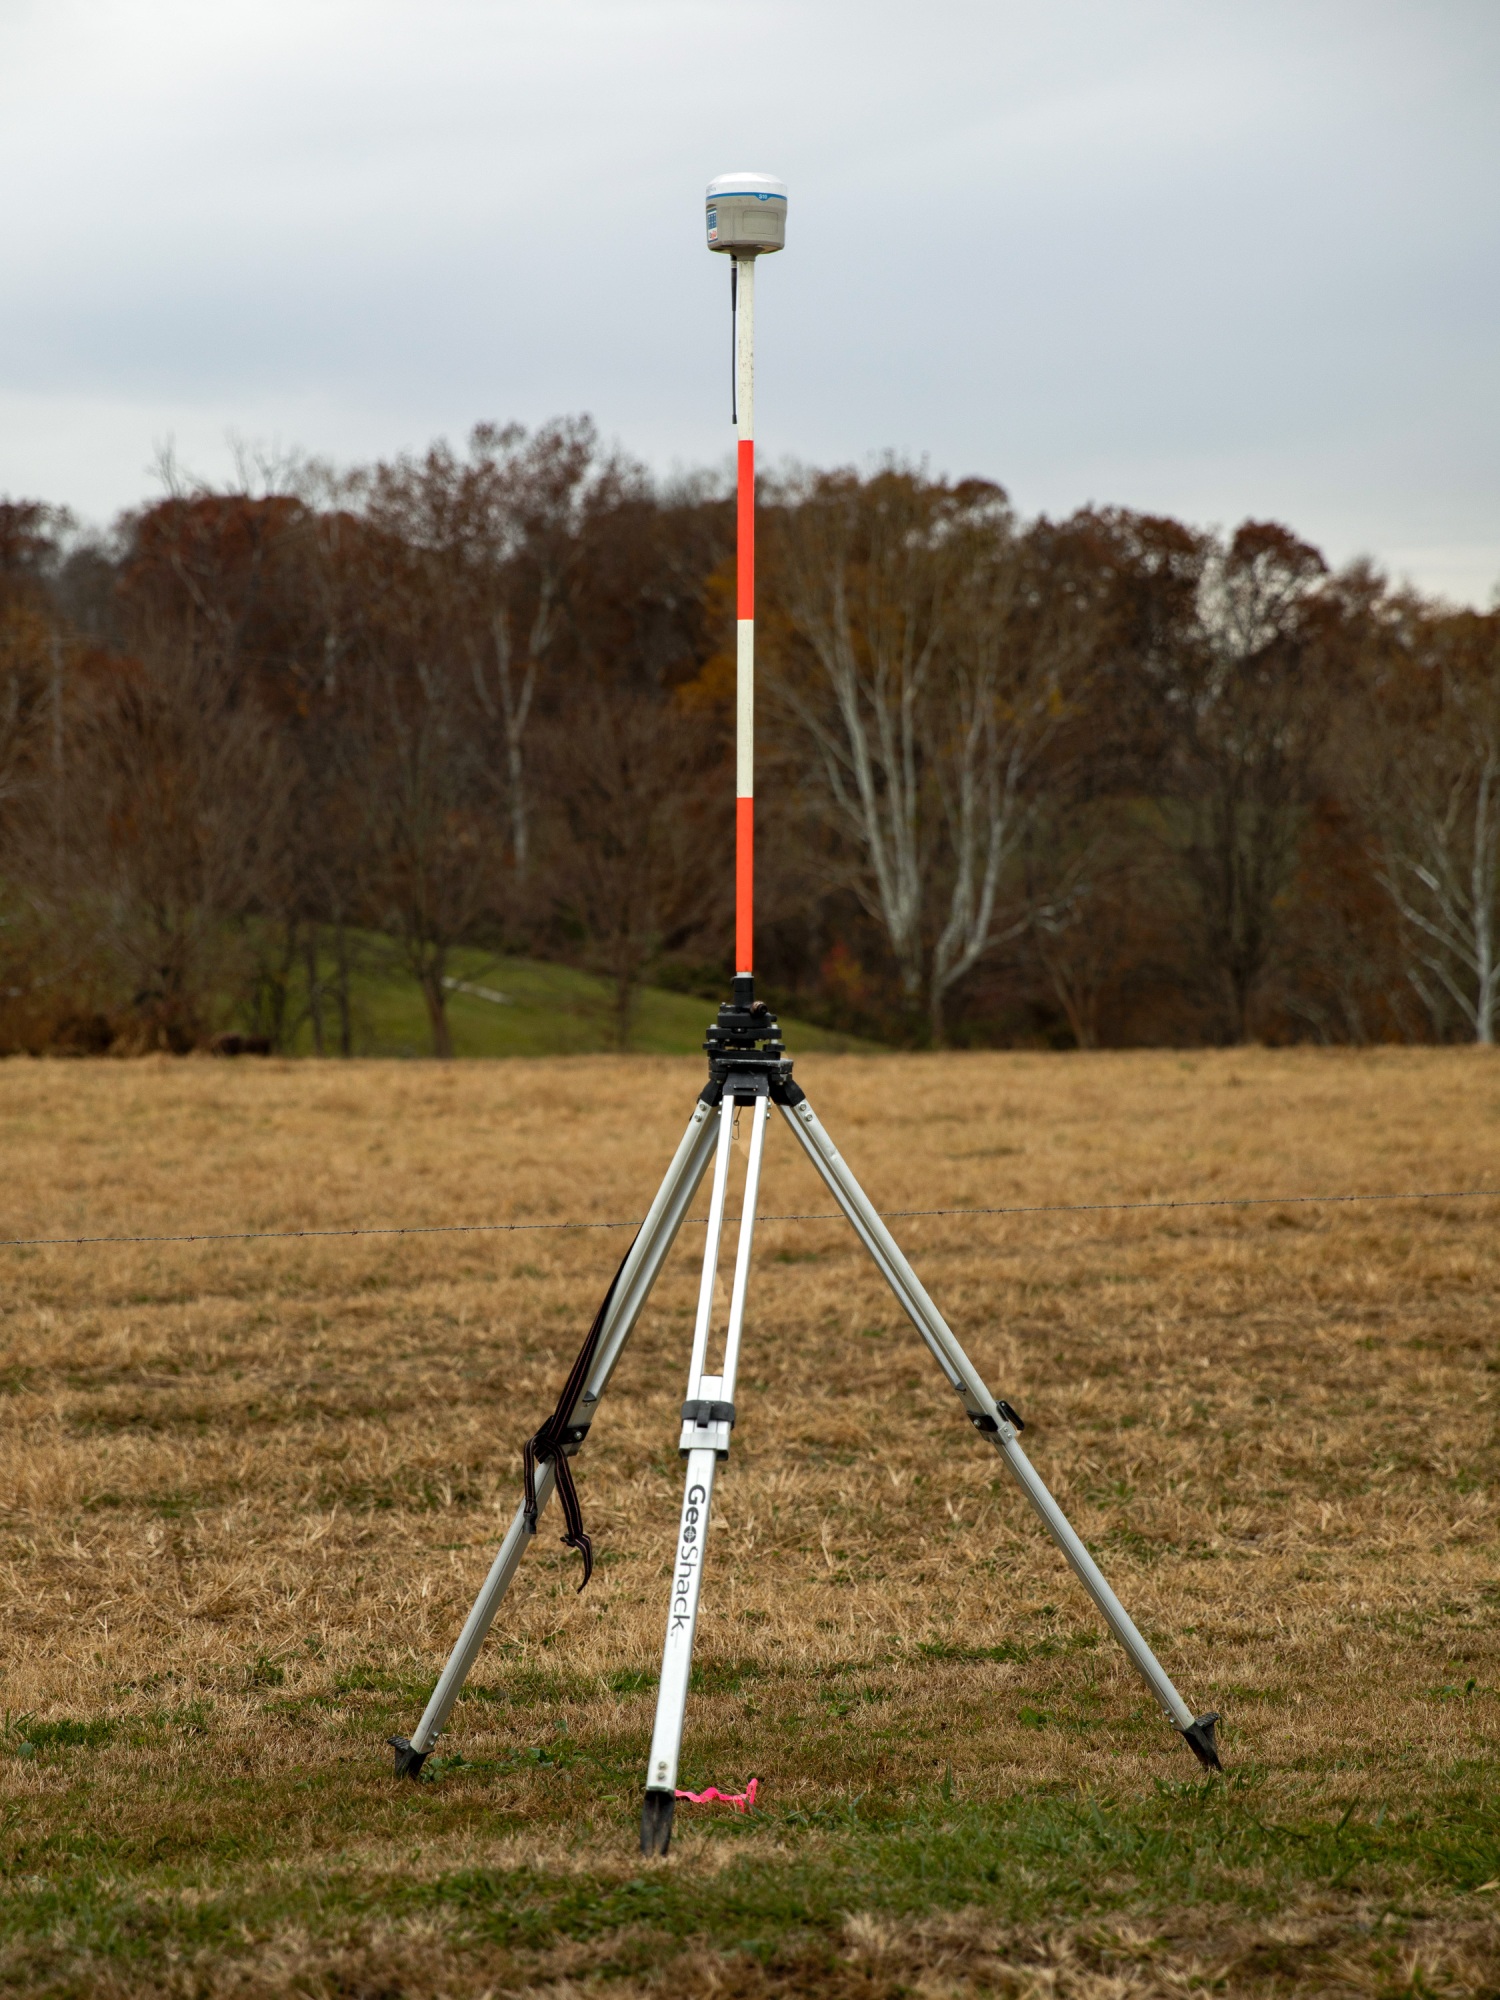 Magnetometric survey equipment in The Plains